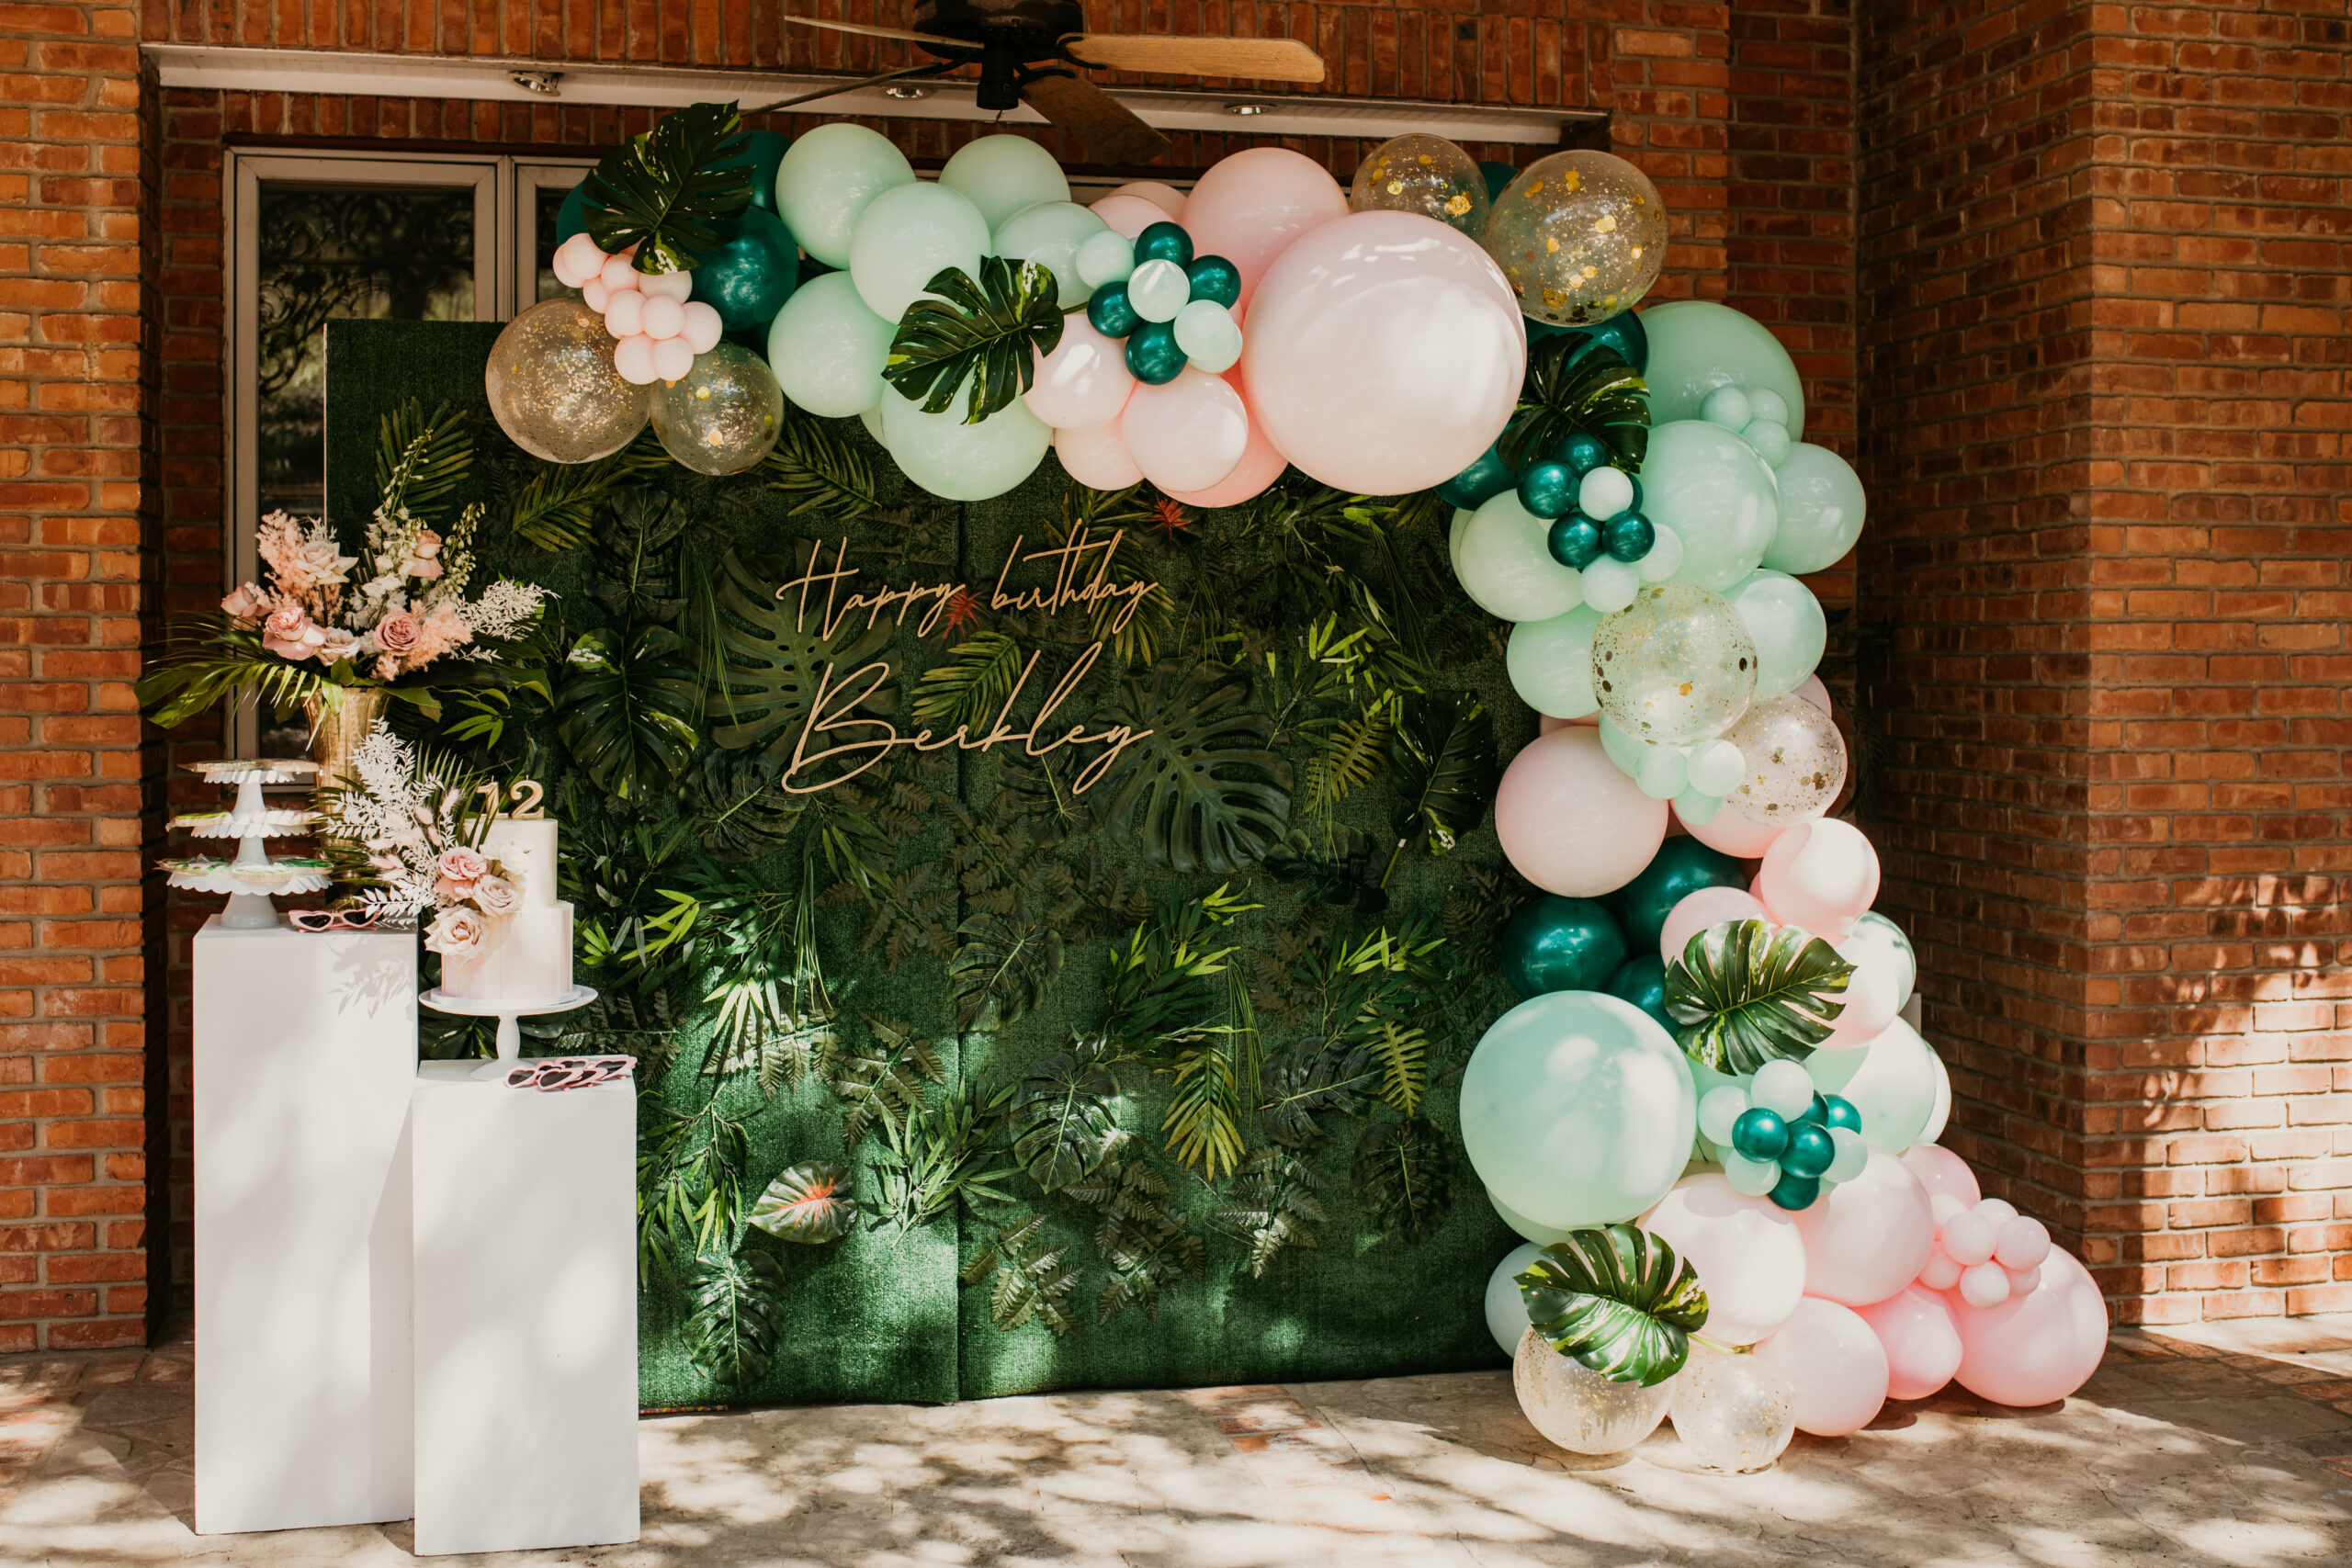 Beverly Hills Hotel Themed Party